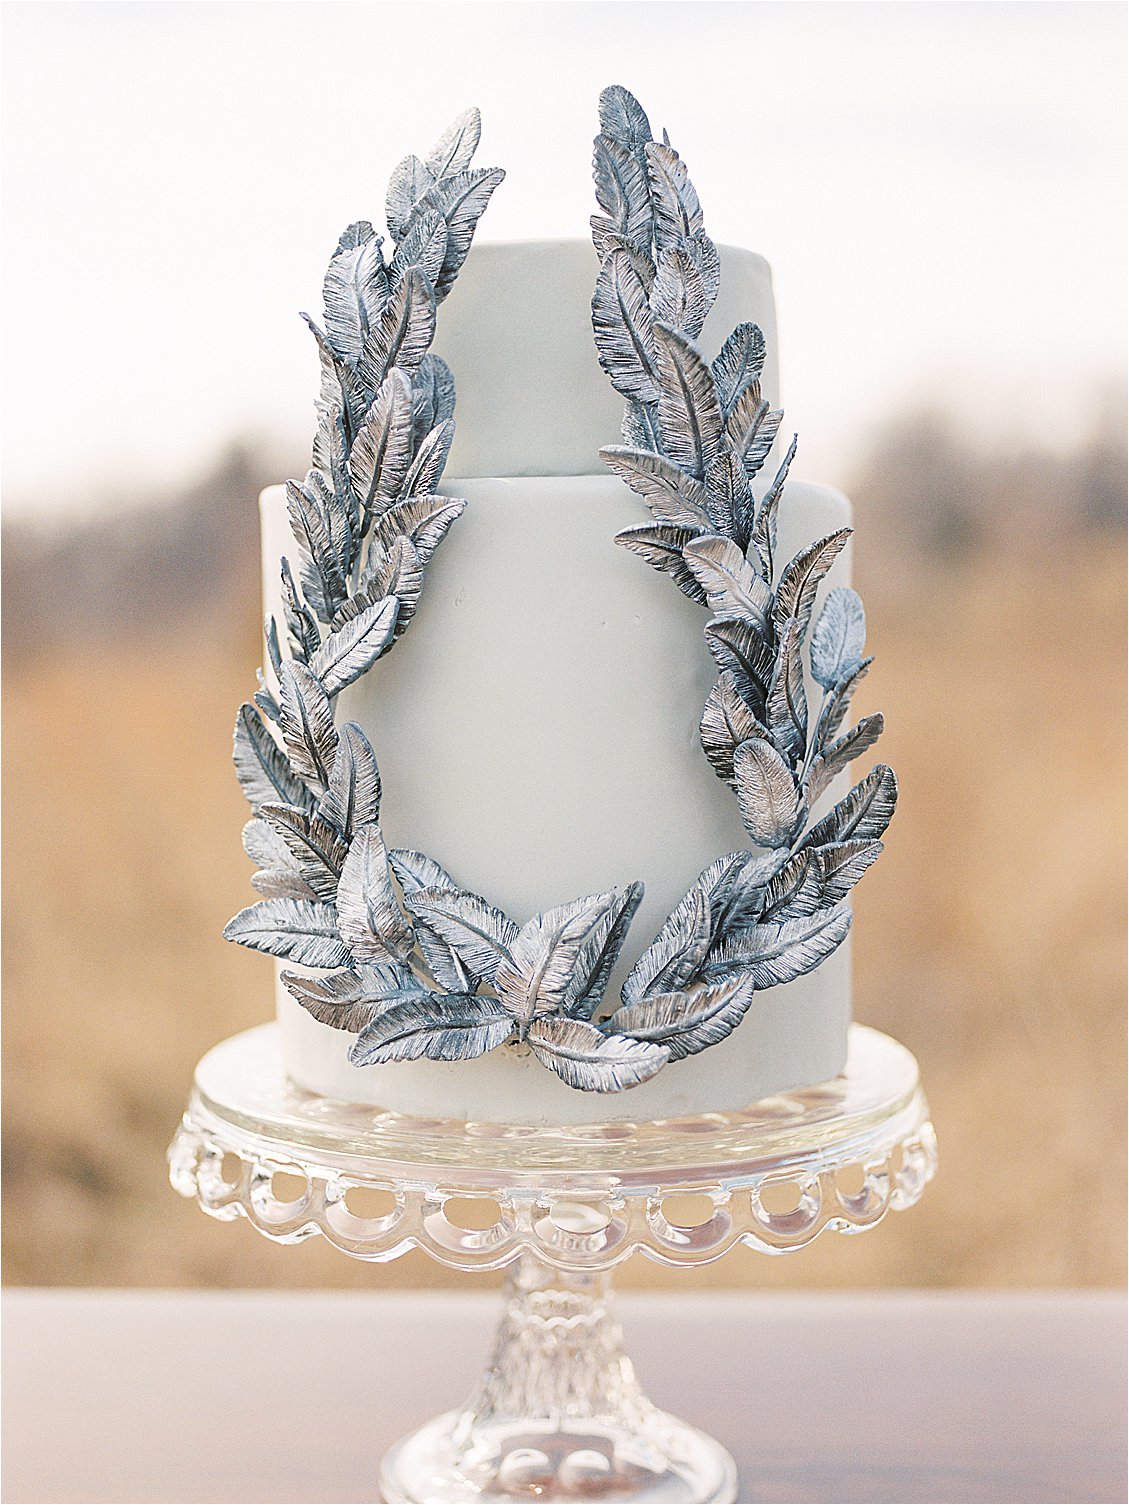 2019 Publications - A Year in Review with Florida and DC Film Wedding Photographer Renee Hollingshead as seen on Martha Stewart Weddings - Metallic Wedding Ideas by Catherine George Cakes with Adriana Marie Events, Chesapeake Bay Foundation, White Glove Rentals, Crimson & Clover Floral and more